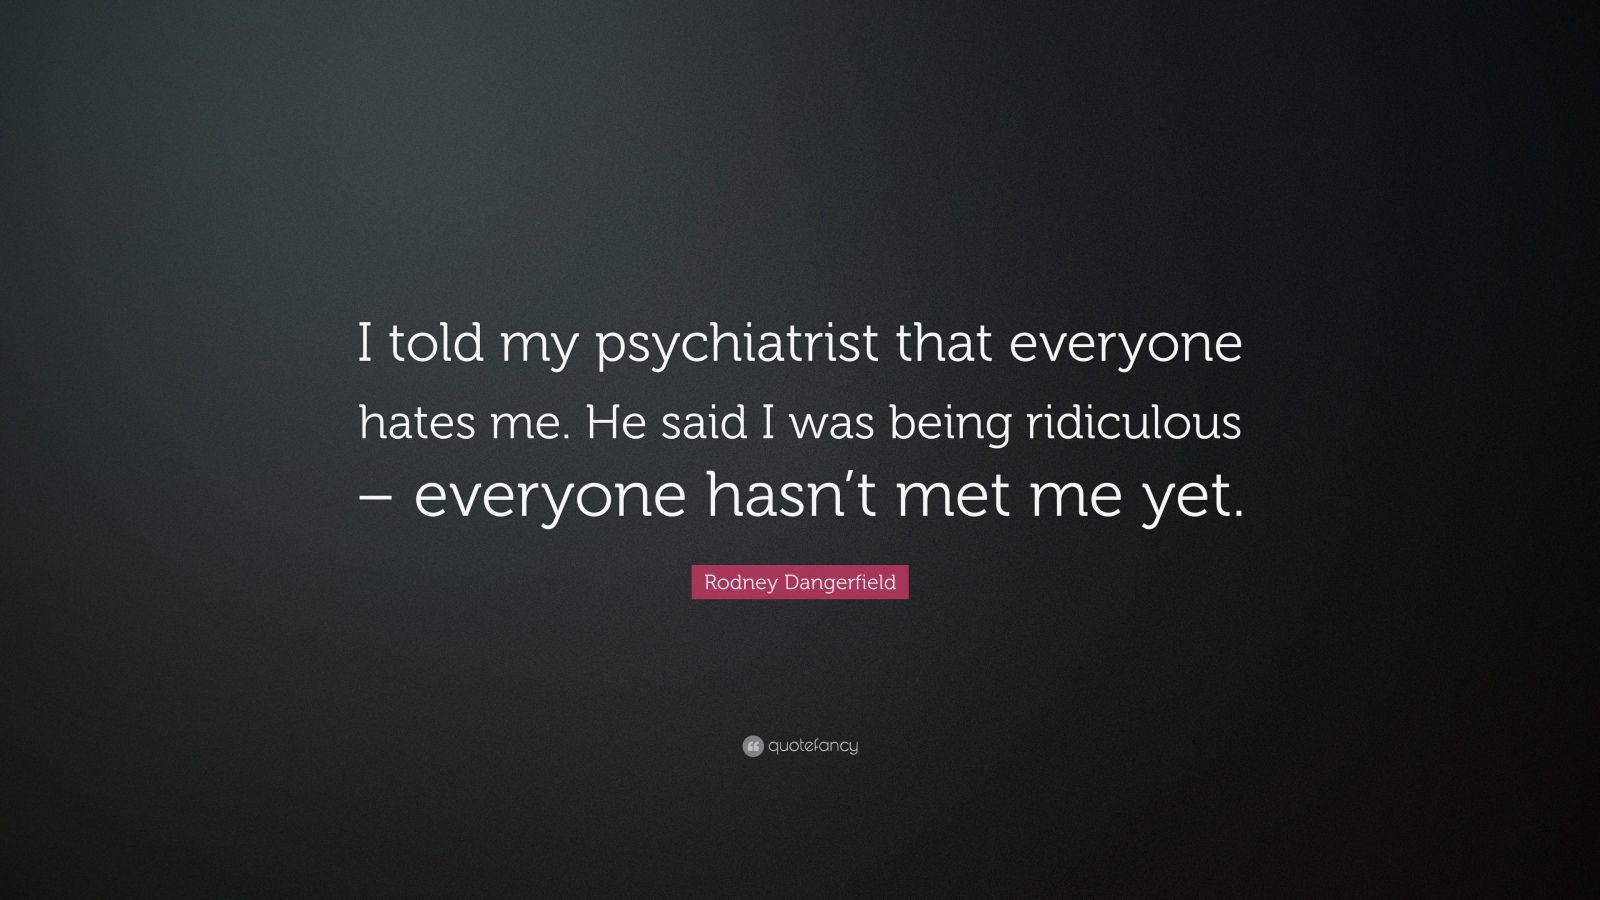 Rodney Dangerfield Quote: “I told my psychiatrist that everyone hates ...